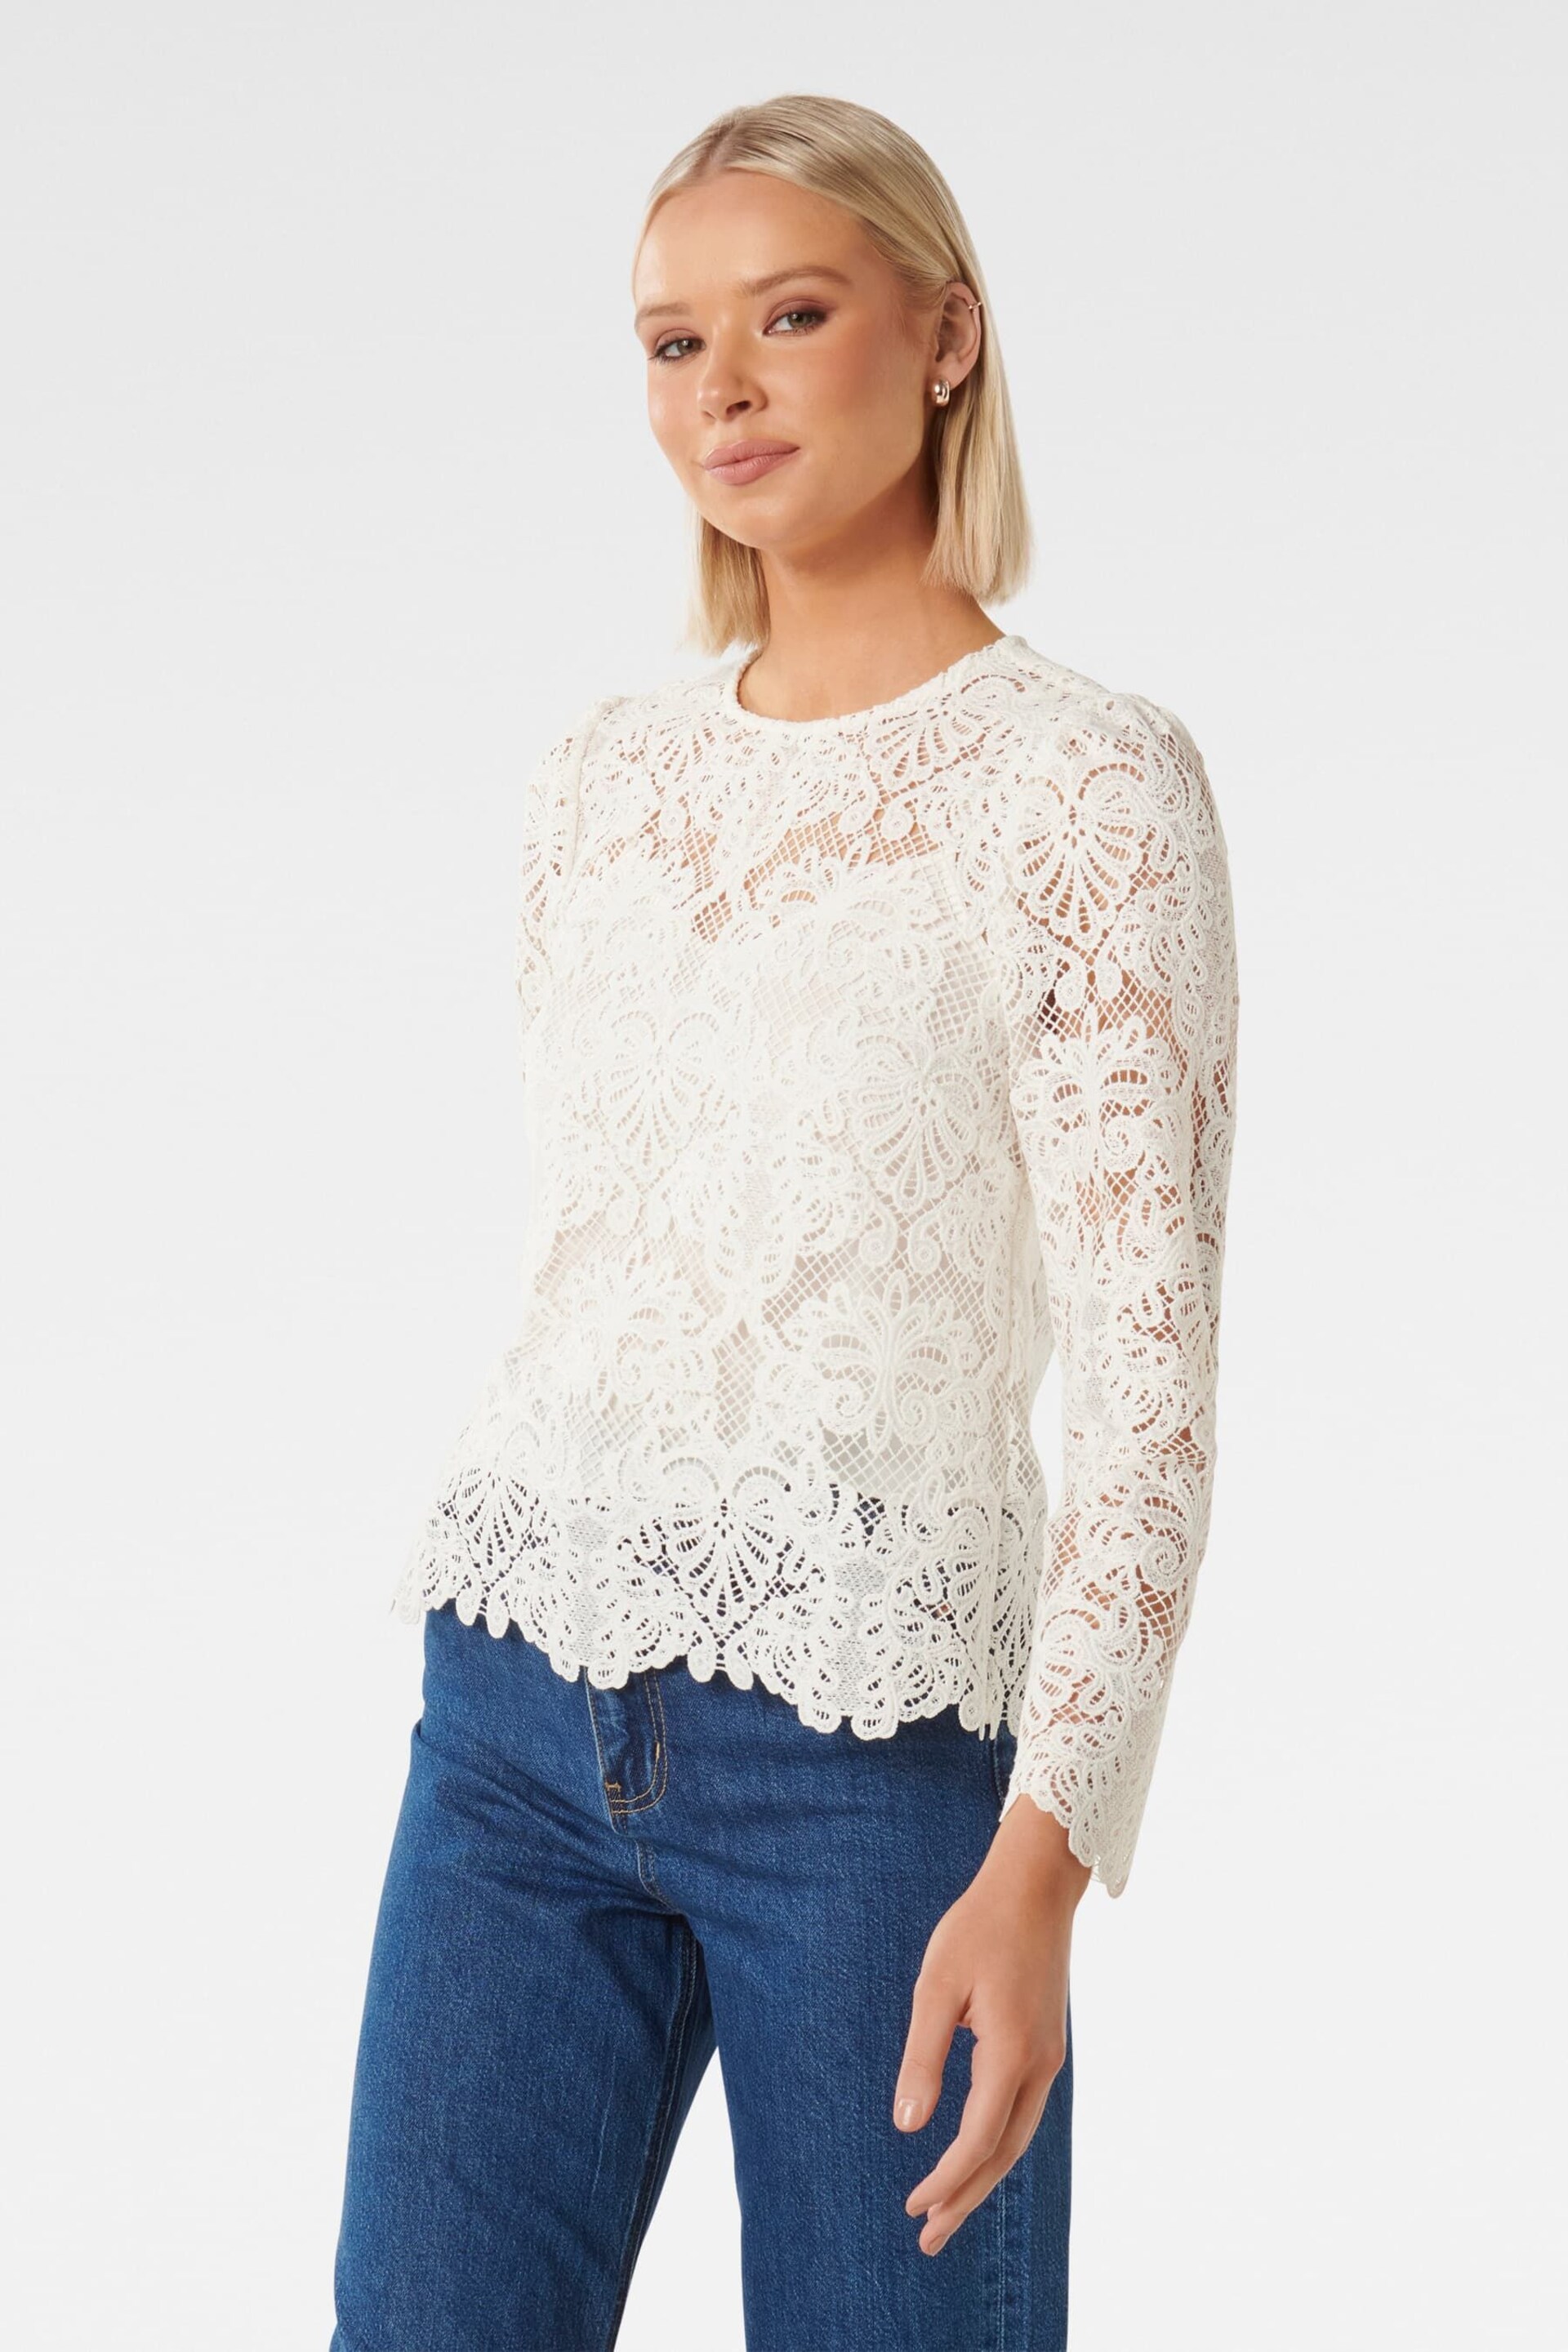 Forever New White Lucille Lace Shell Top - Image 3 of 5